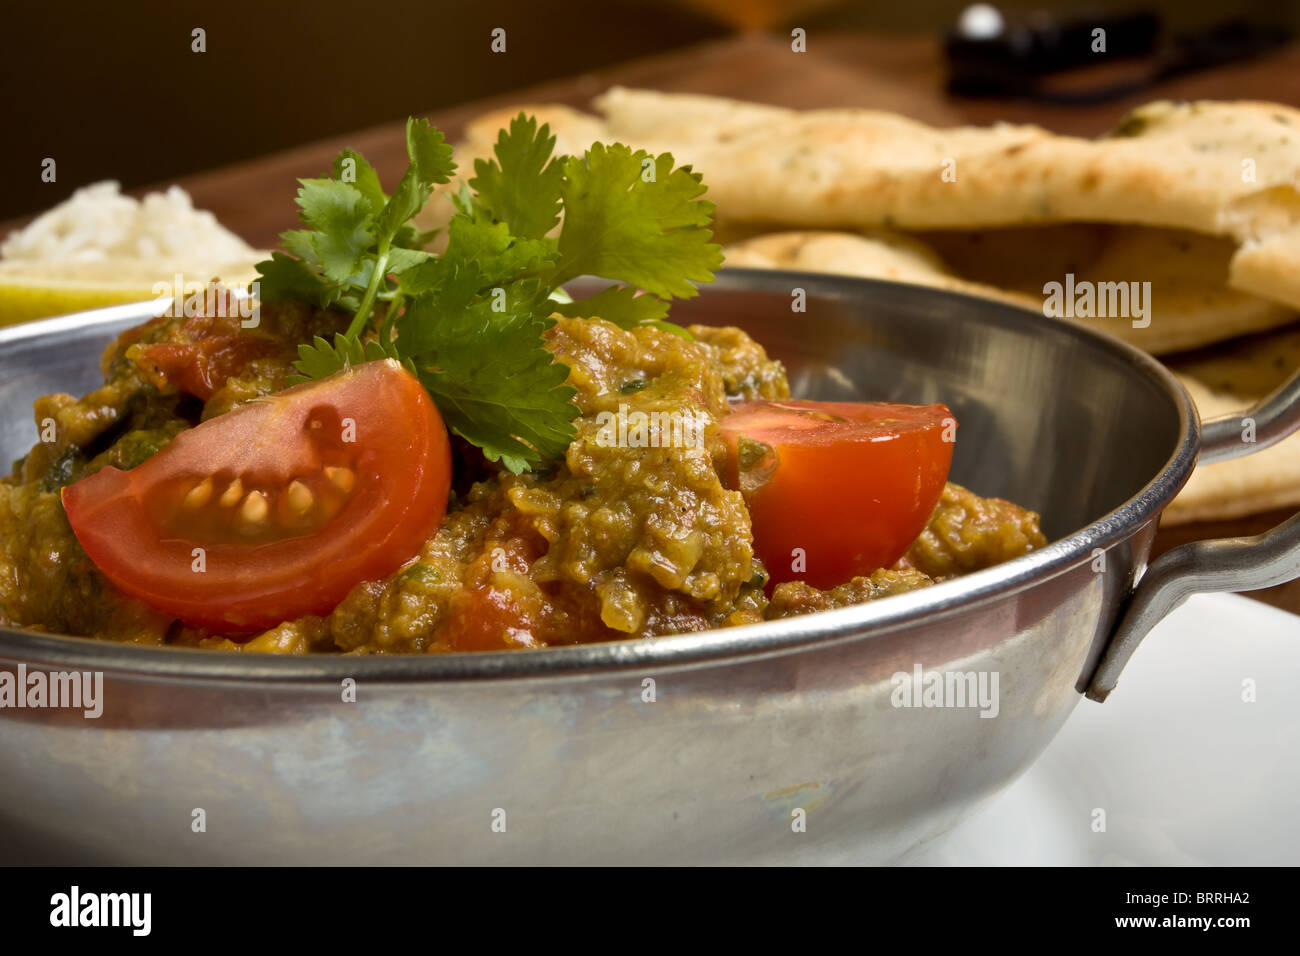 Indian Curry meal of spicy chicken, rice and naan bread. Stock Photo